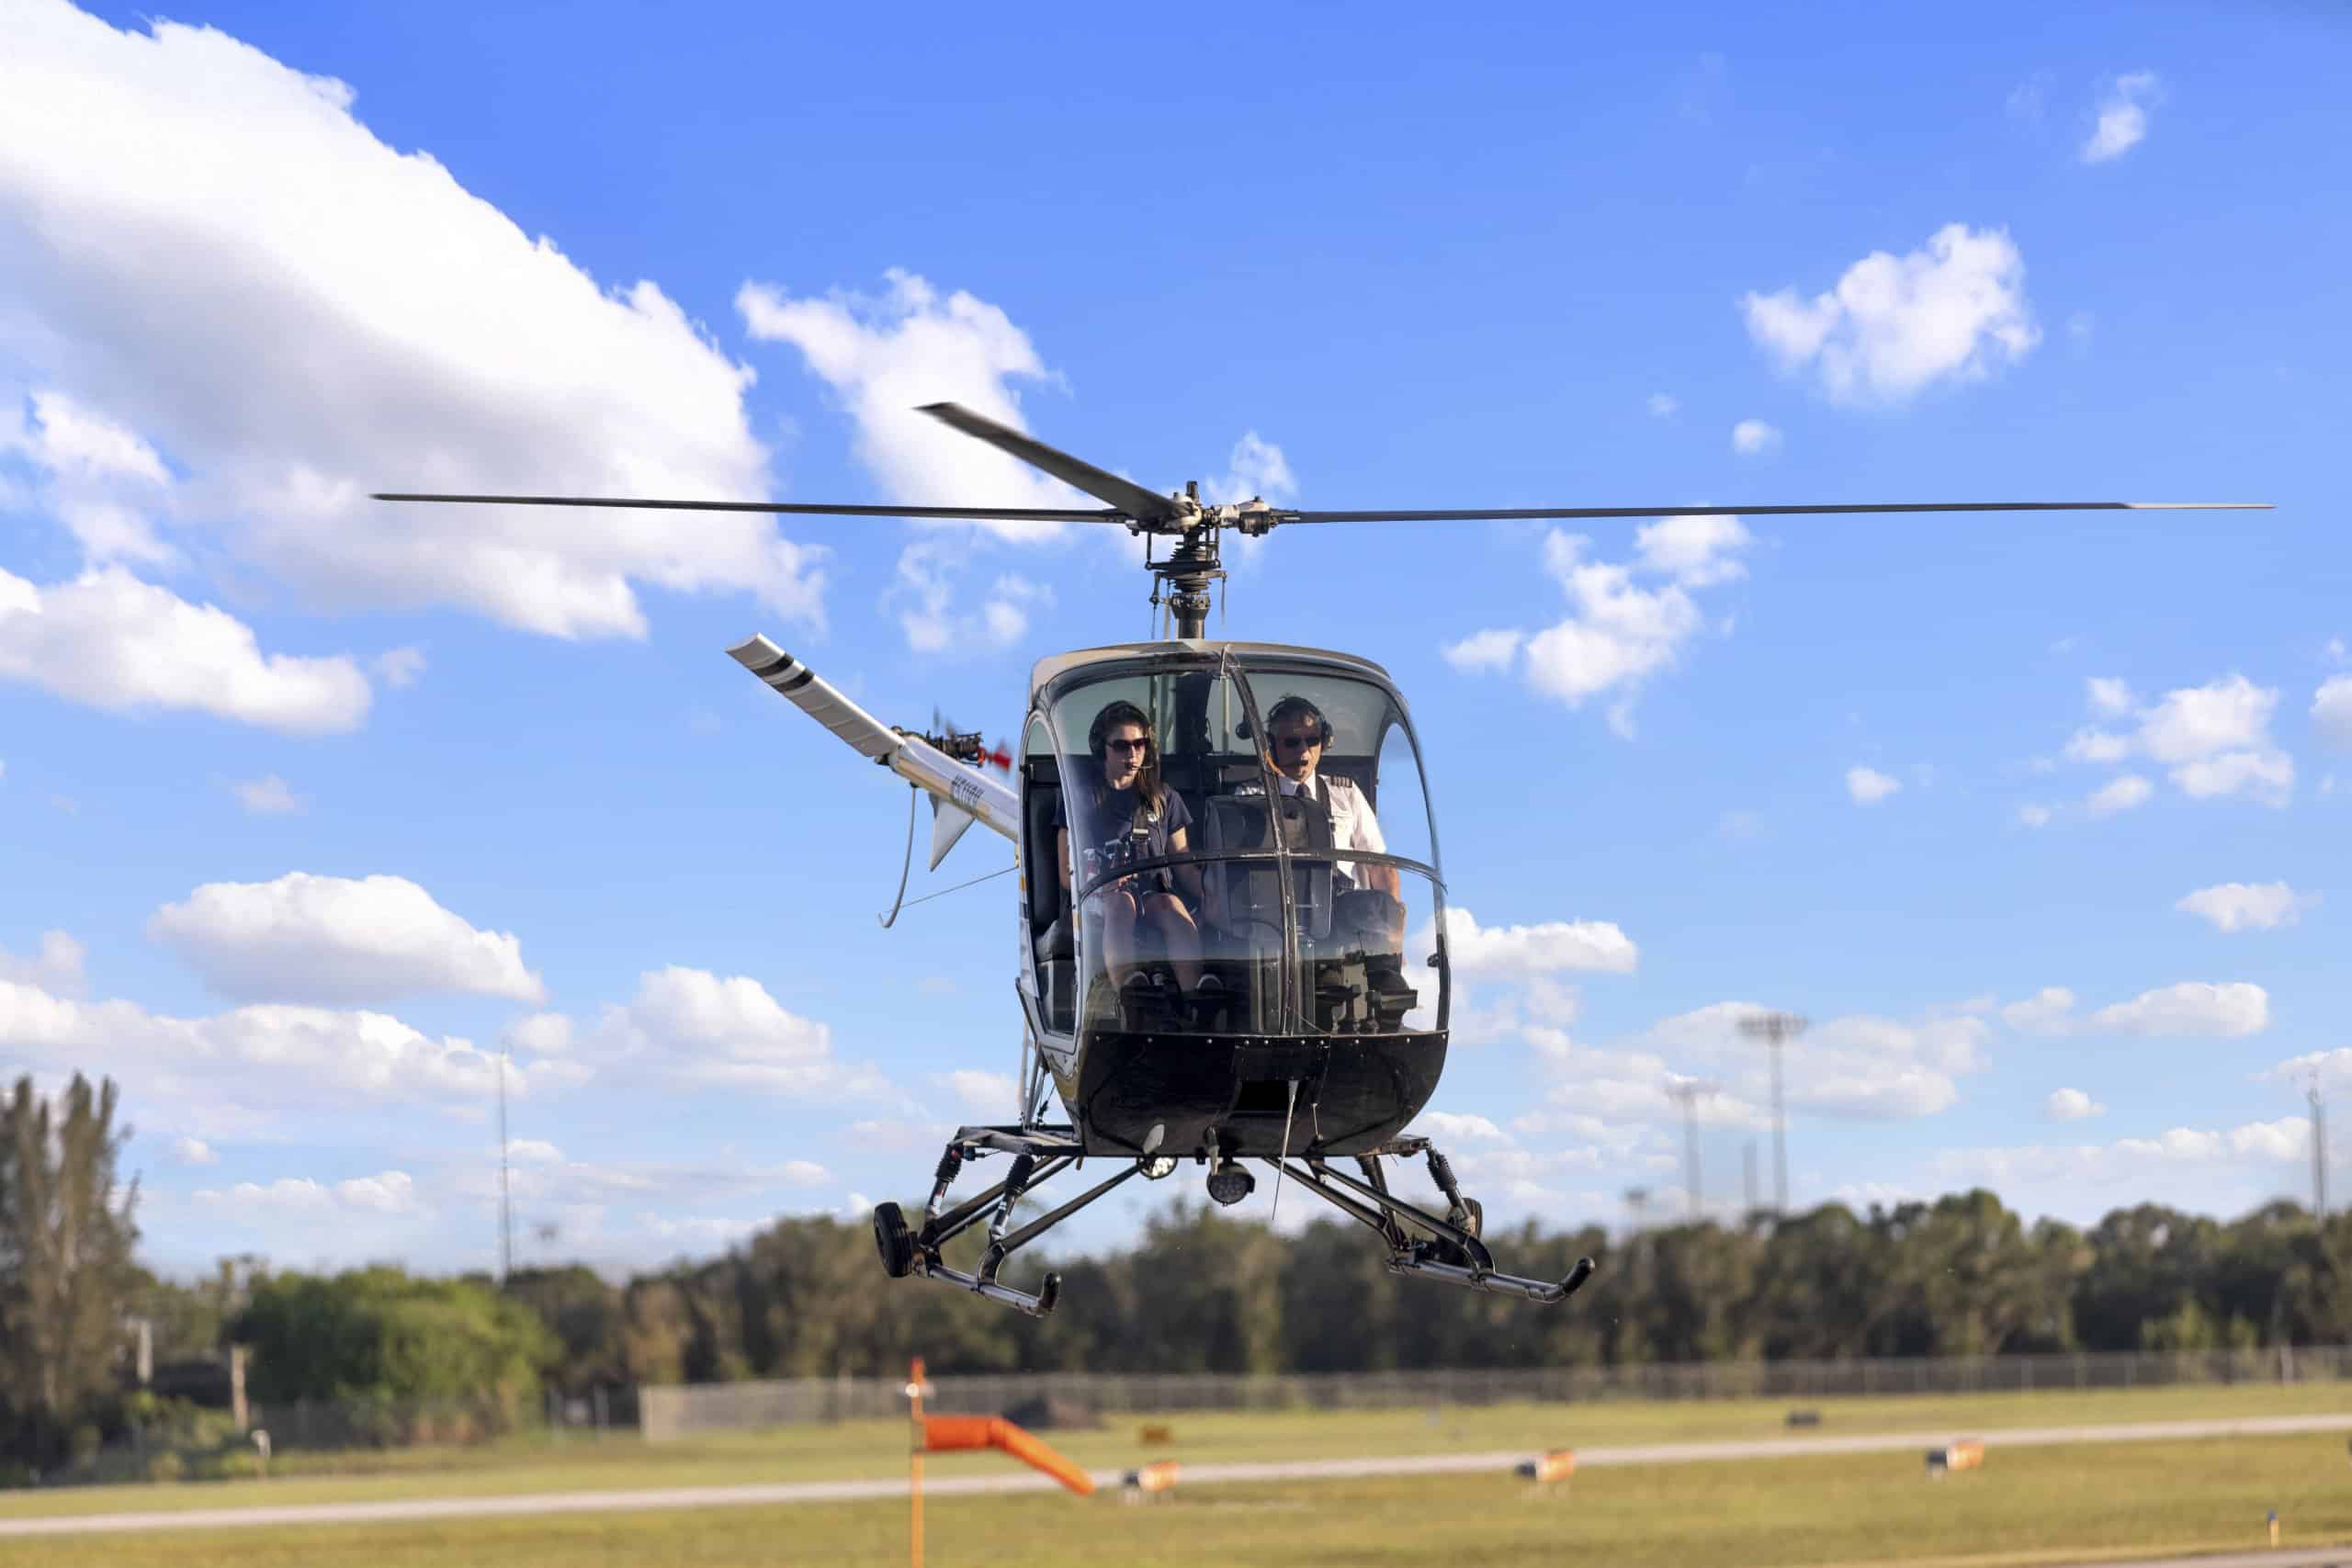 Photo of a helicopter from the front with blue sky and white clouds in the background